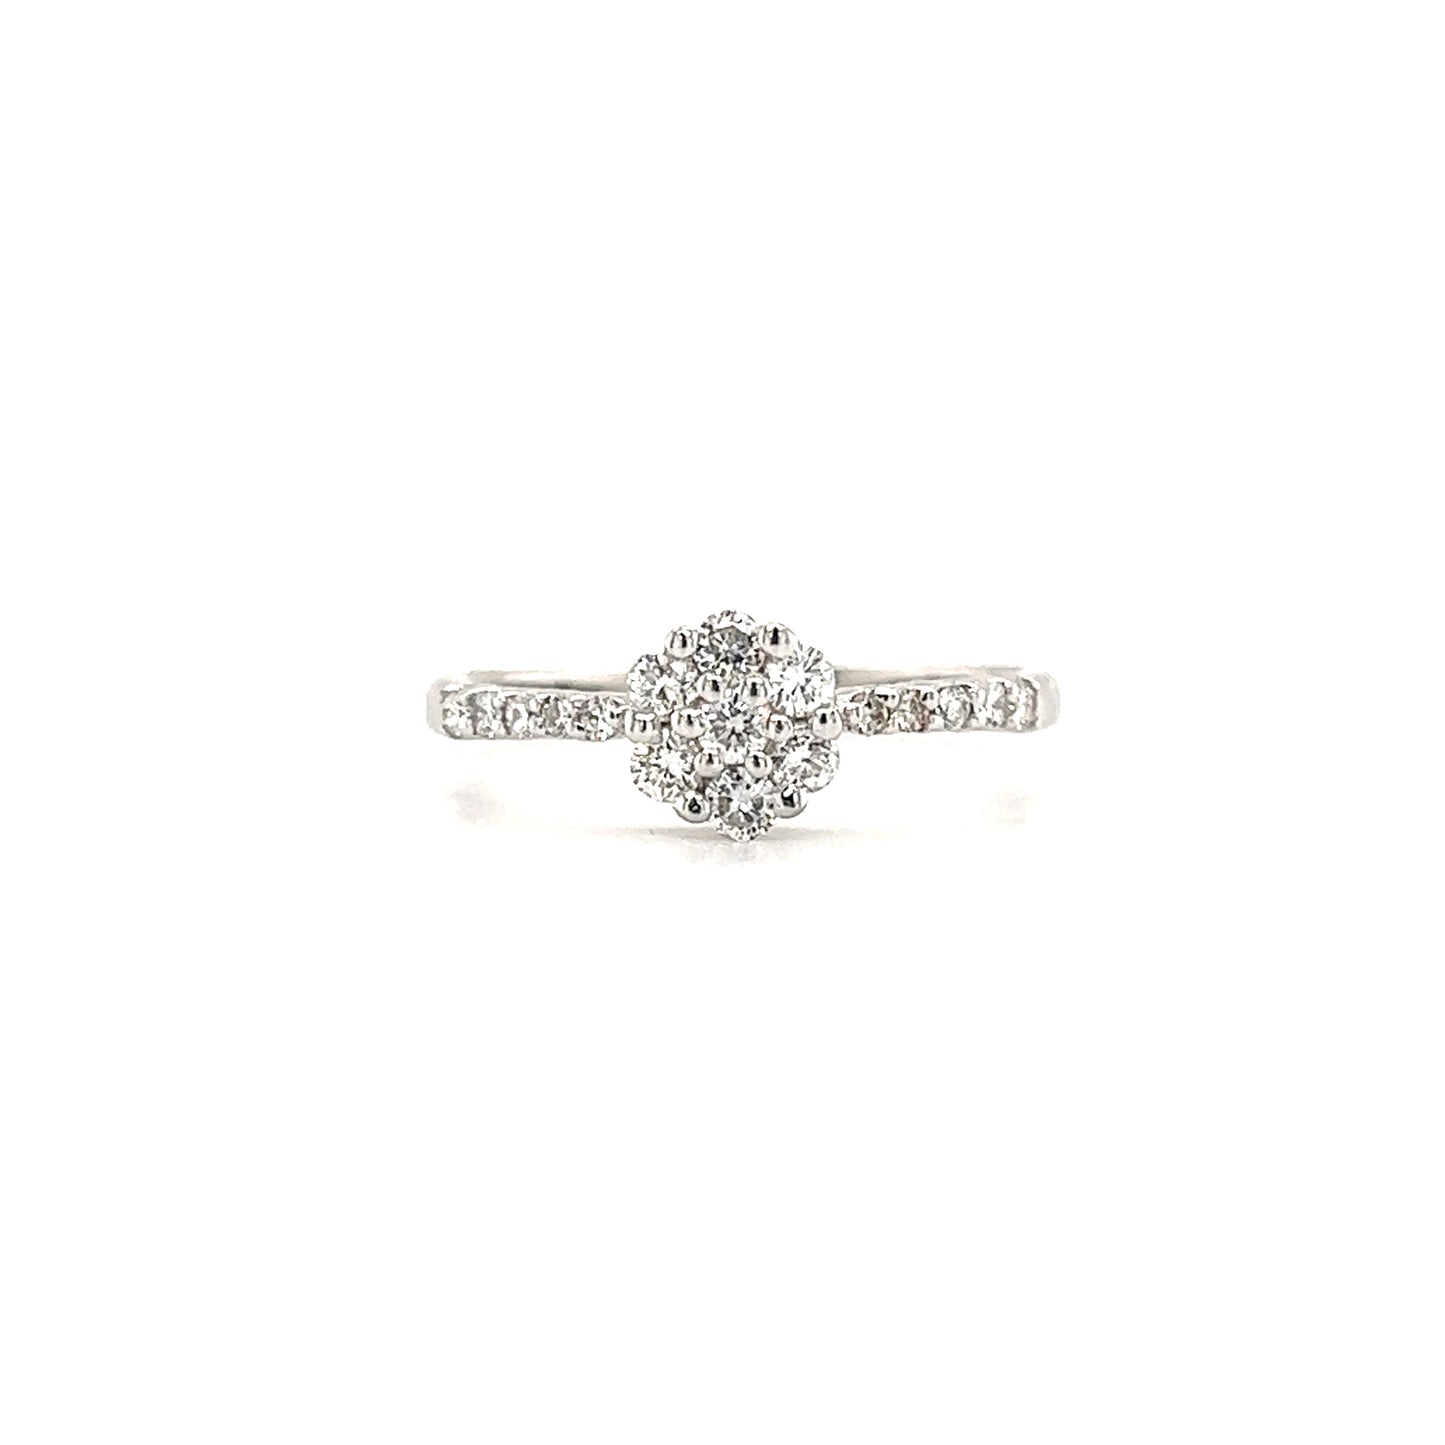 Floral Diamond Ring with 0.36ctw of Diamonds in 14K White Gold Front View